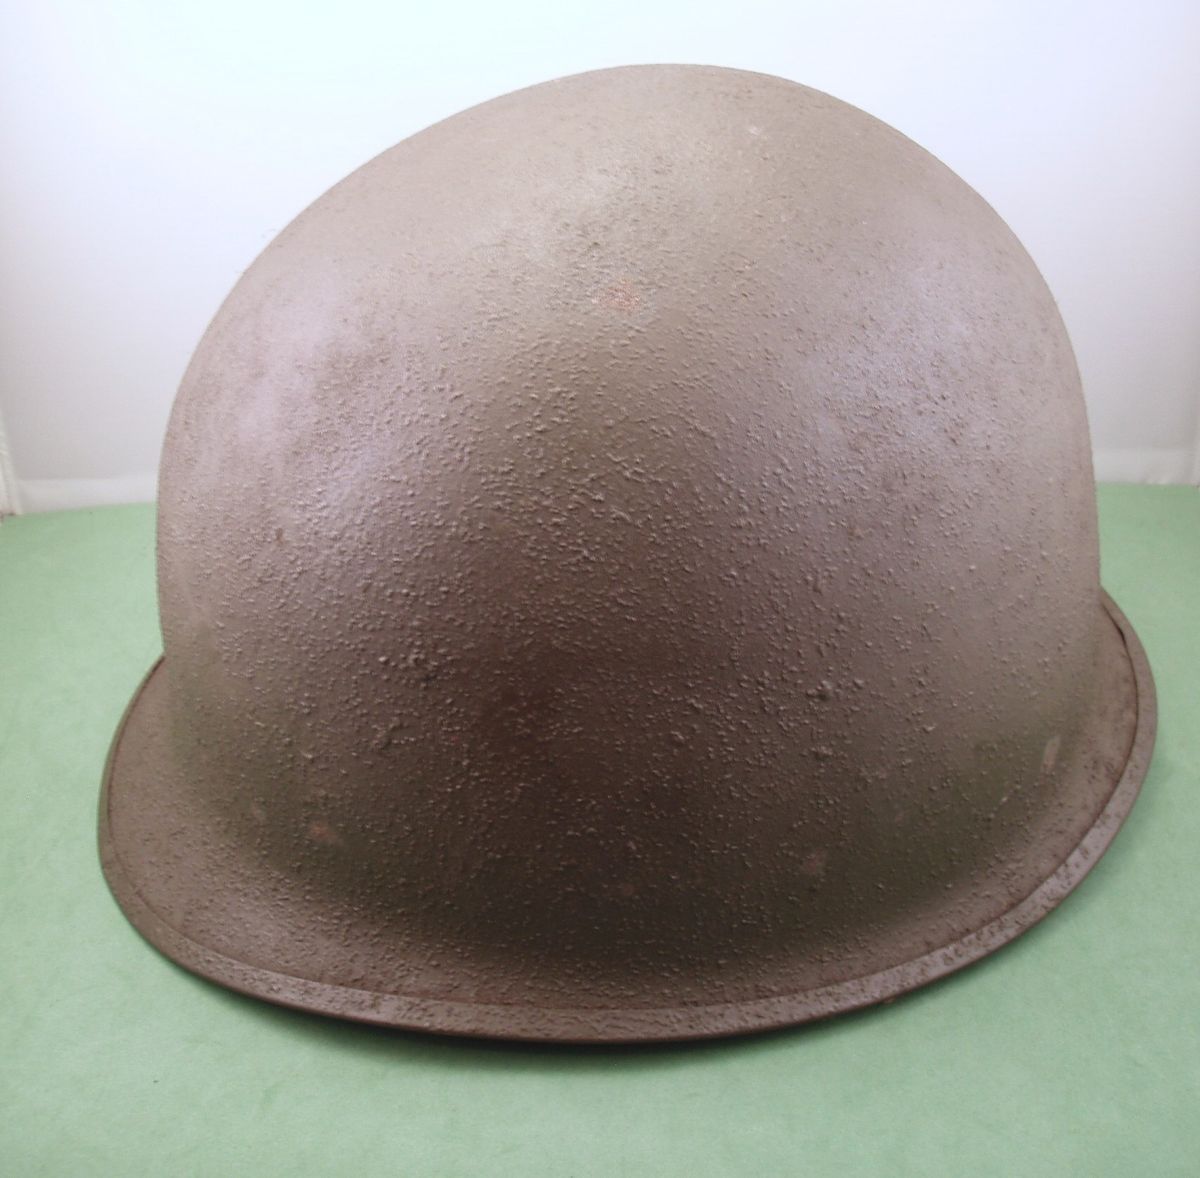 Vintage WWII US Army Fixed Bale Front Seam M1 Helmet w/ Chin Strap 